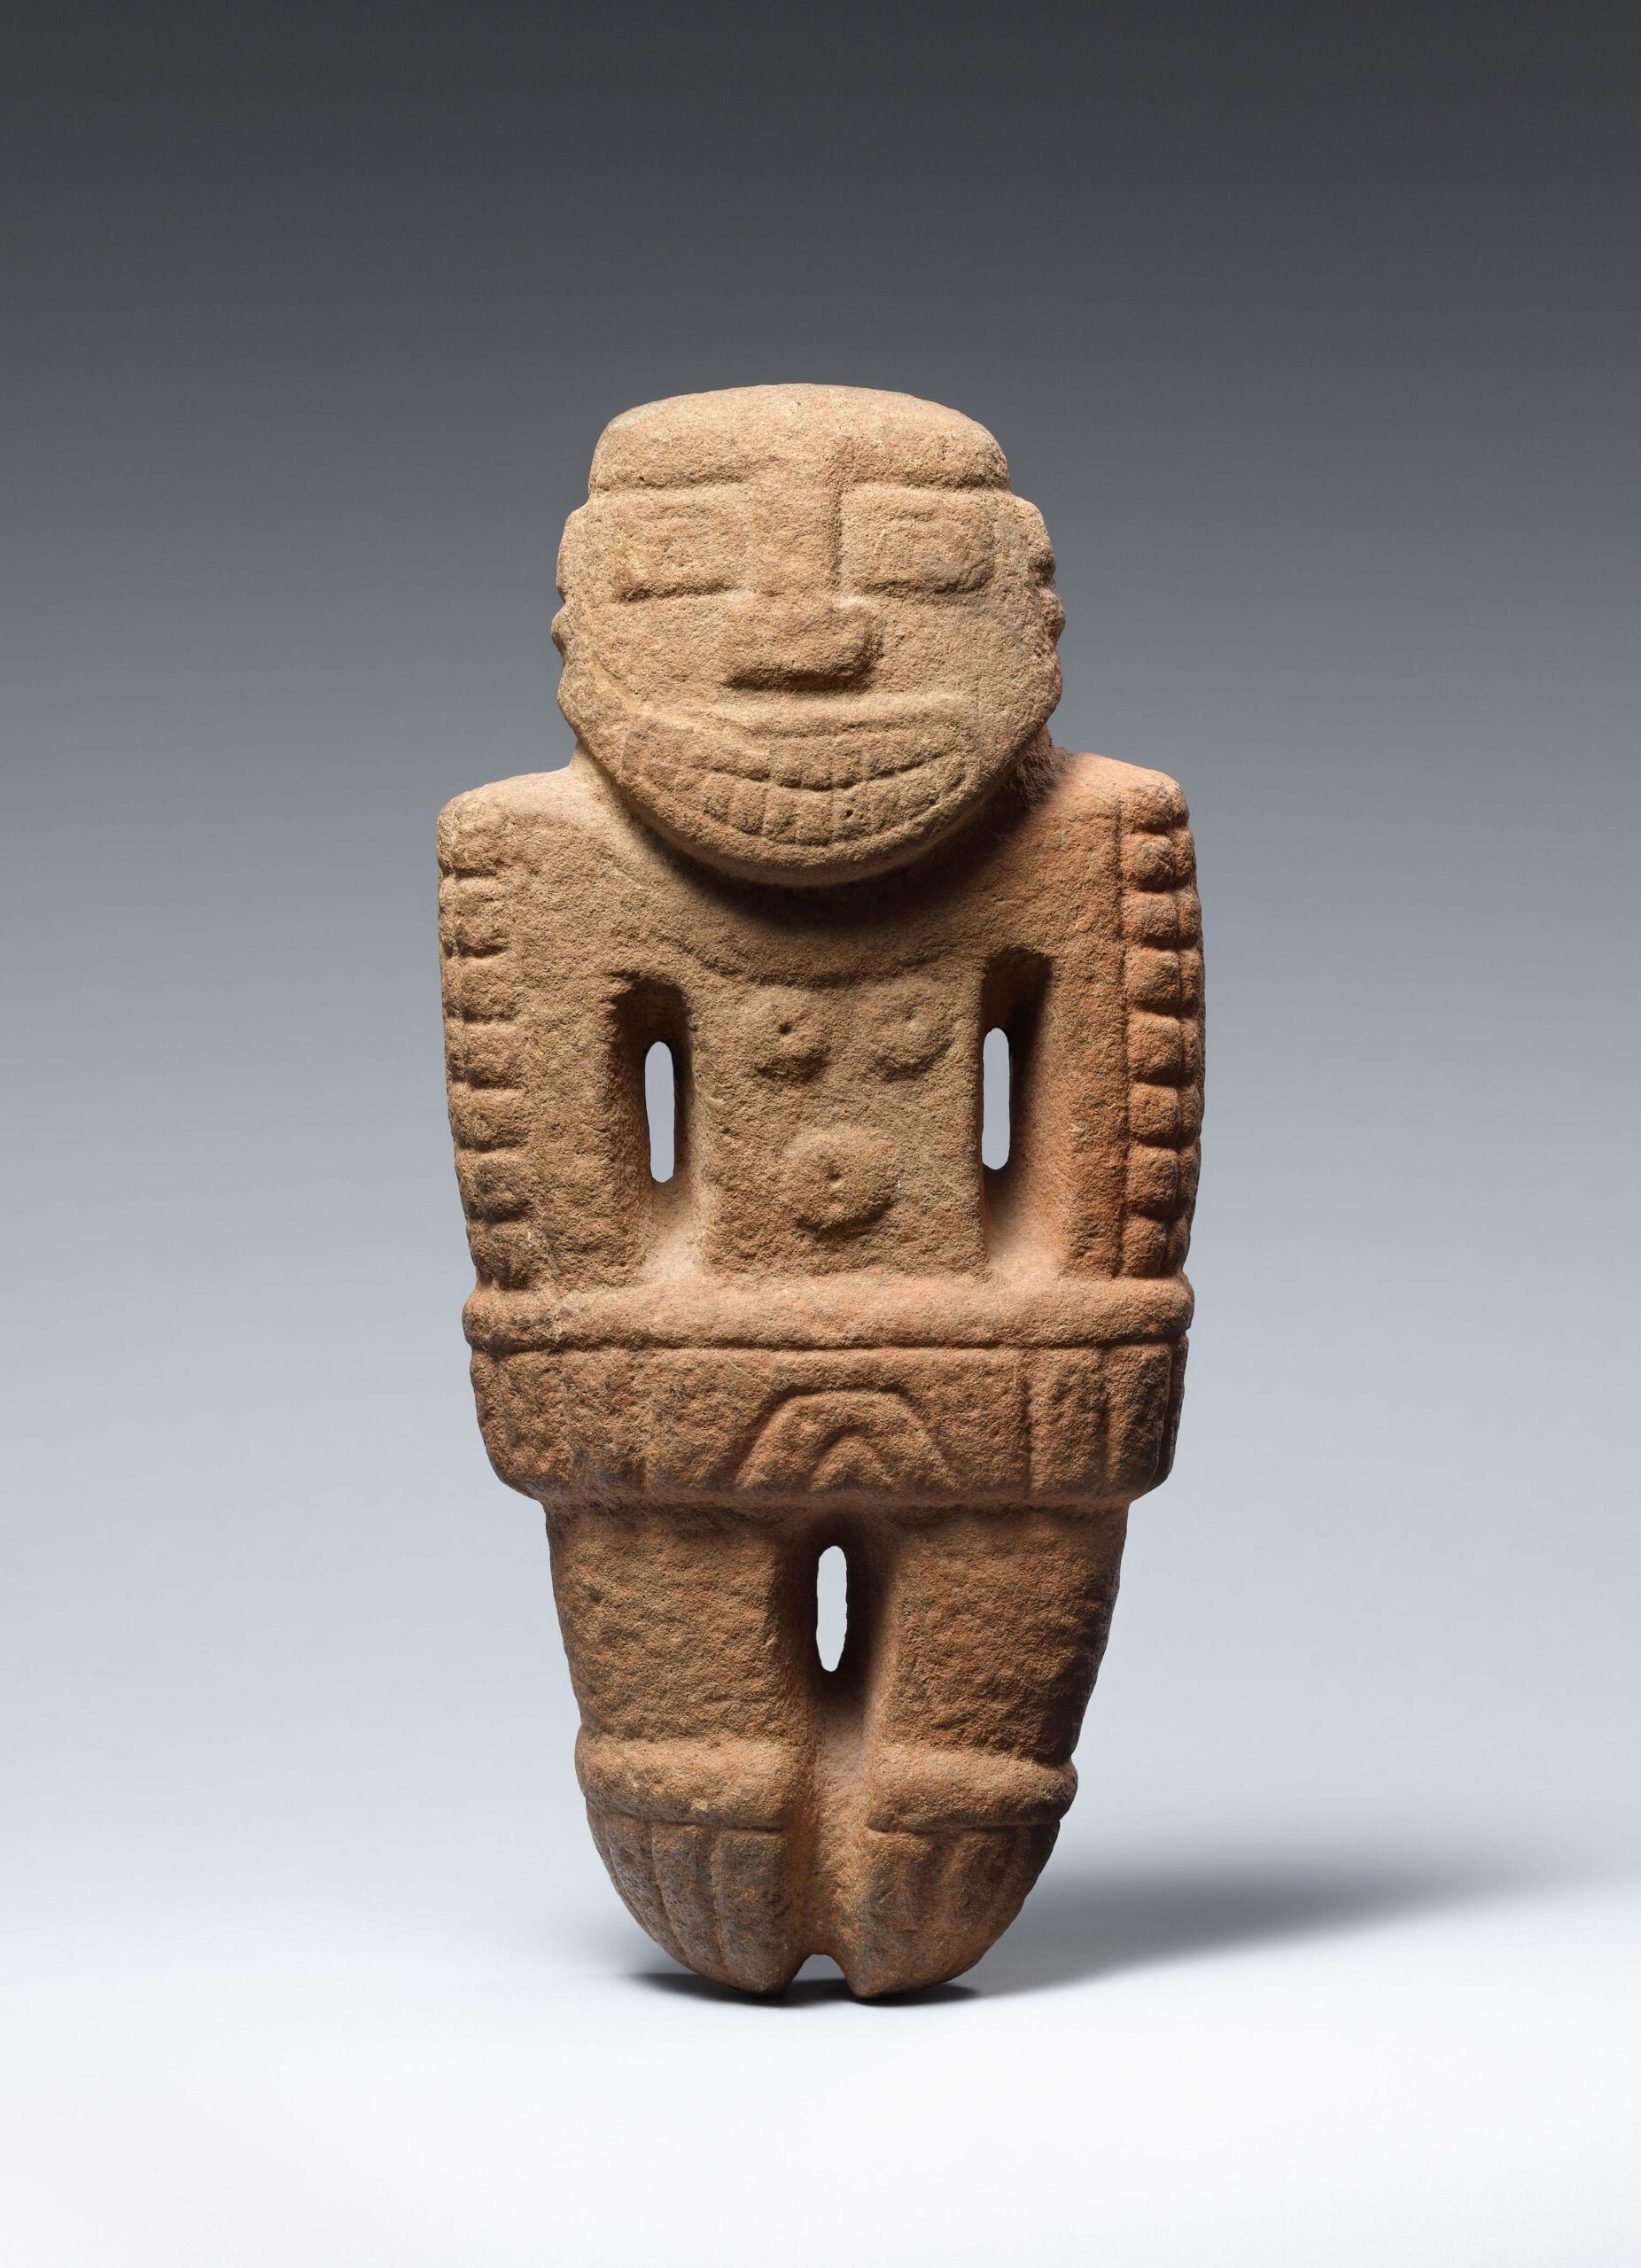 Stone figure wearing a necklace and loincloth, with an open mouth revealing teeth and incised arms at each side.